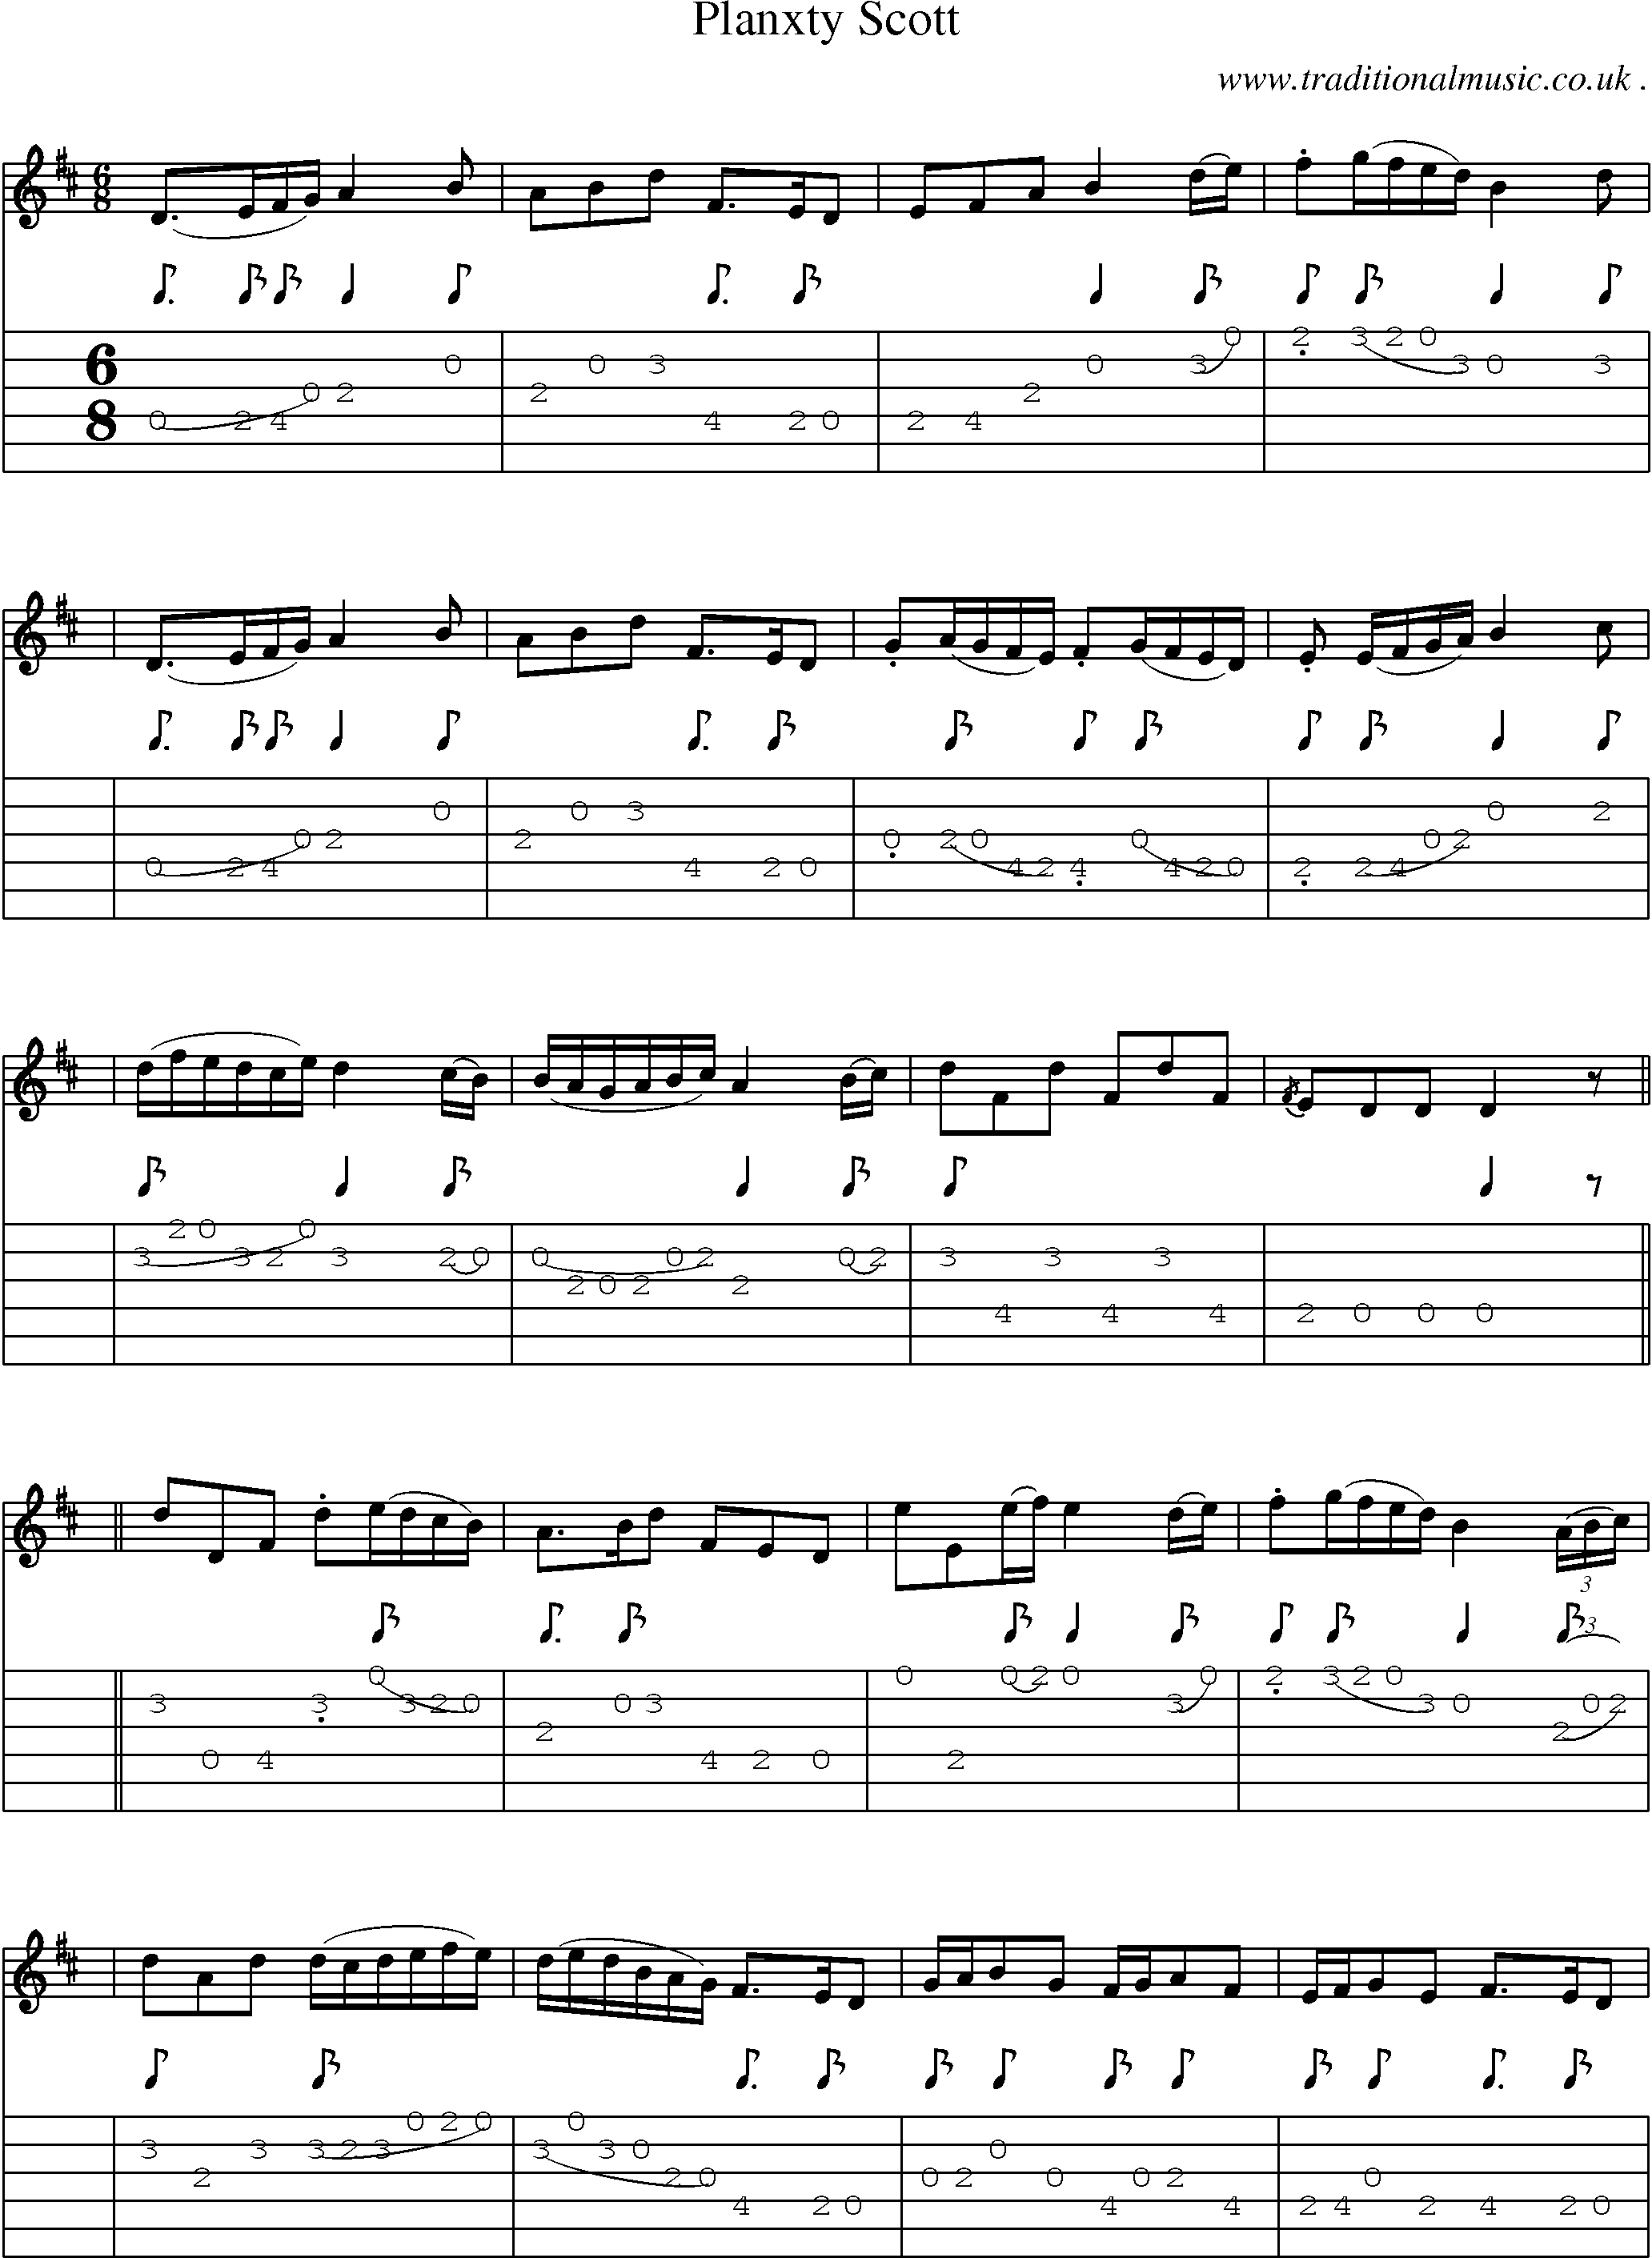 Sheet-music  score, Chords and Guitar Tabs for Planxty Scott